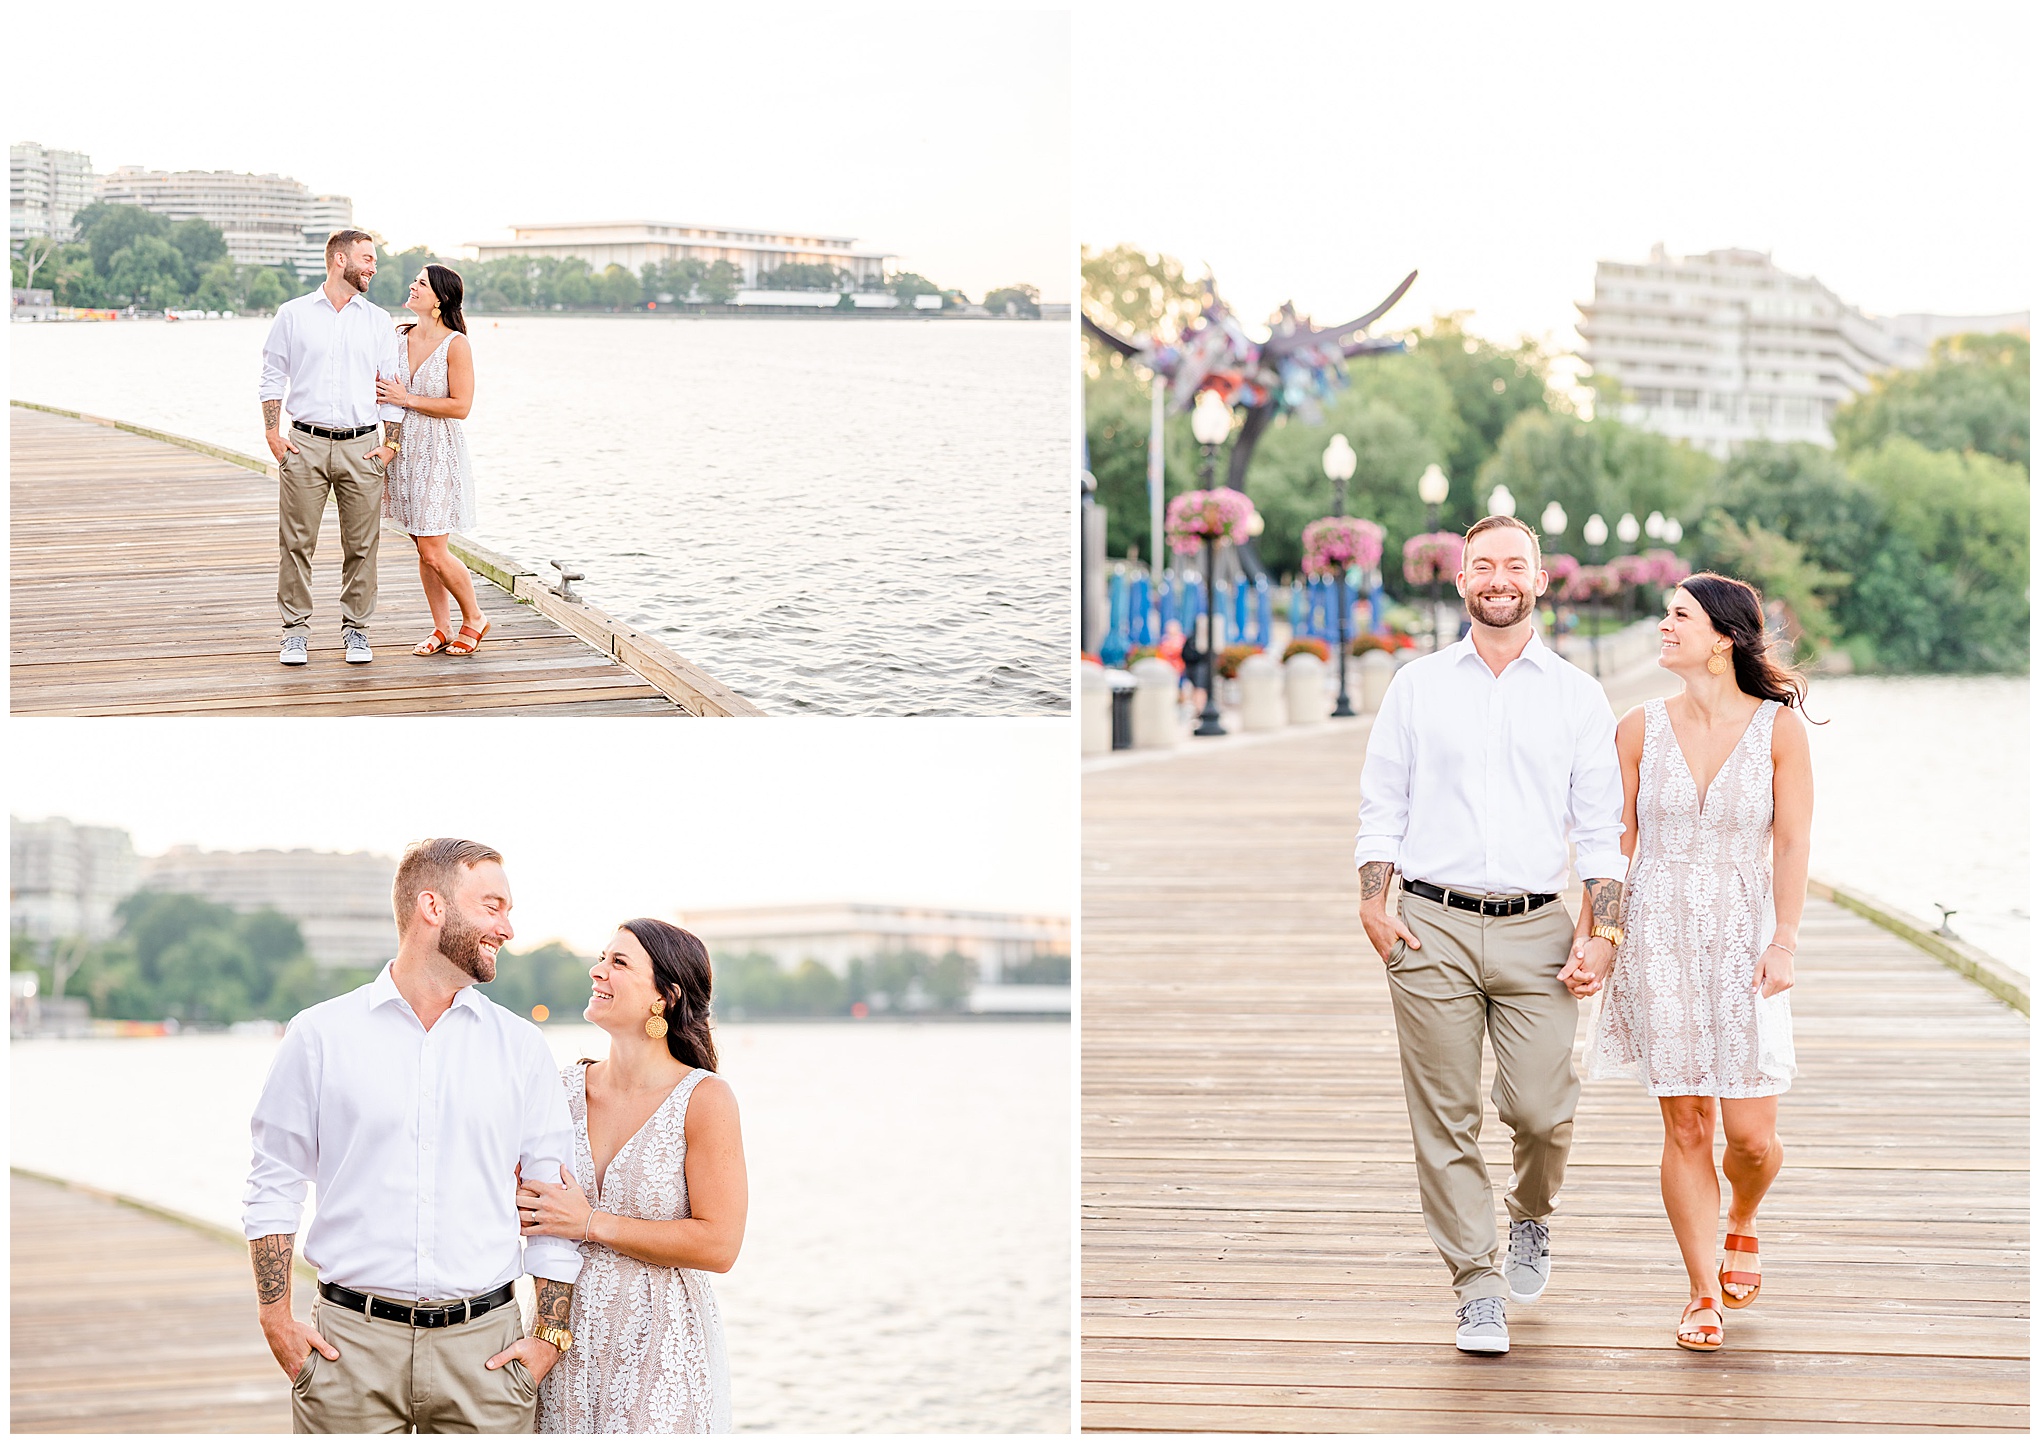 Georgetown waterfront engagement session, Georgetown engagement photos, Georgetown wedding photographer, DC wedding photographer, waterfront engagement photos, Georgetown waterfront engagement photos, DC engagement photos, Rachel E.H. Photography, summer engagement photos, couple holding hands, couple waling on boardwalk, woman in white dress